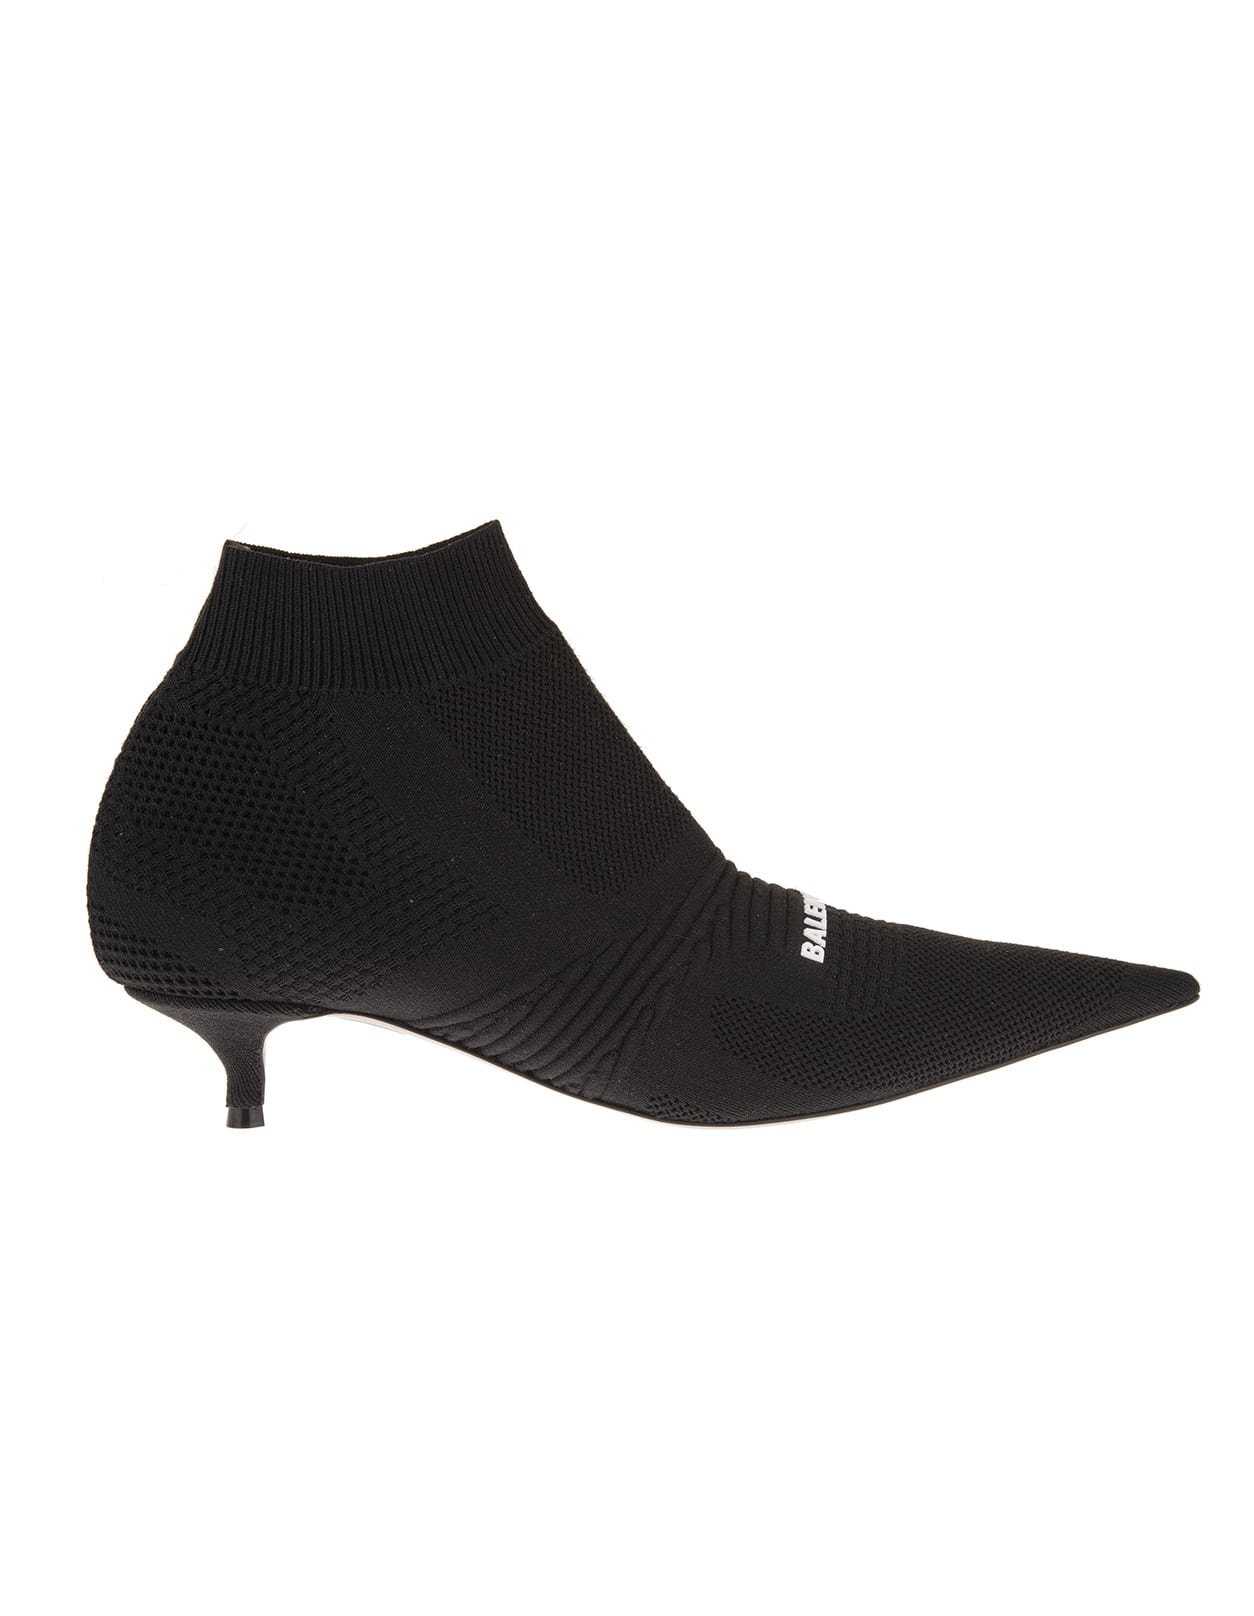 Buy Balenciaga Black Pointed Knit Ankle Boot online, shop Balenciaga shoes with free shipping